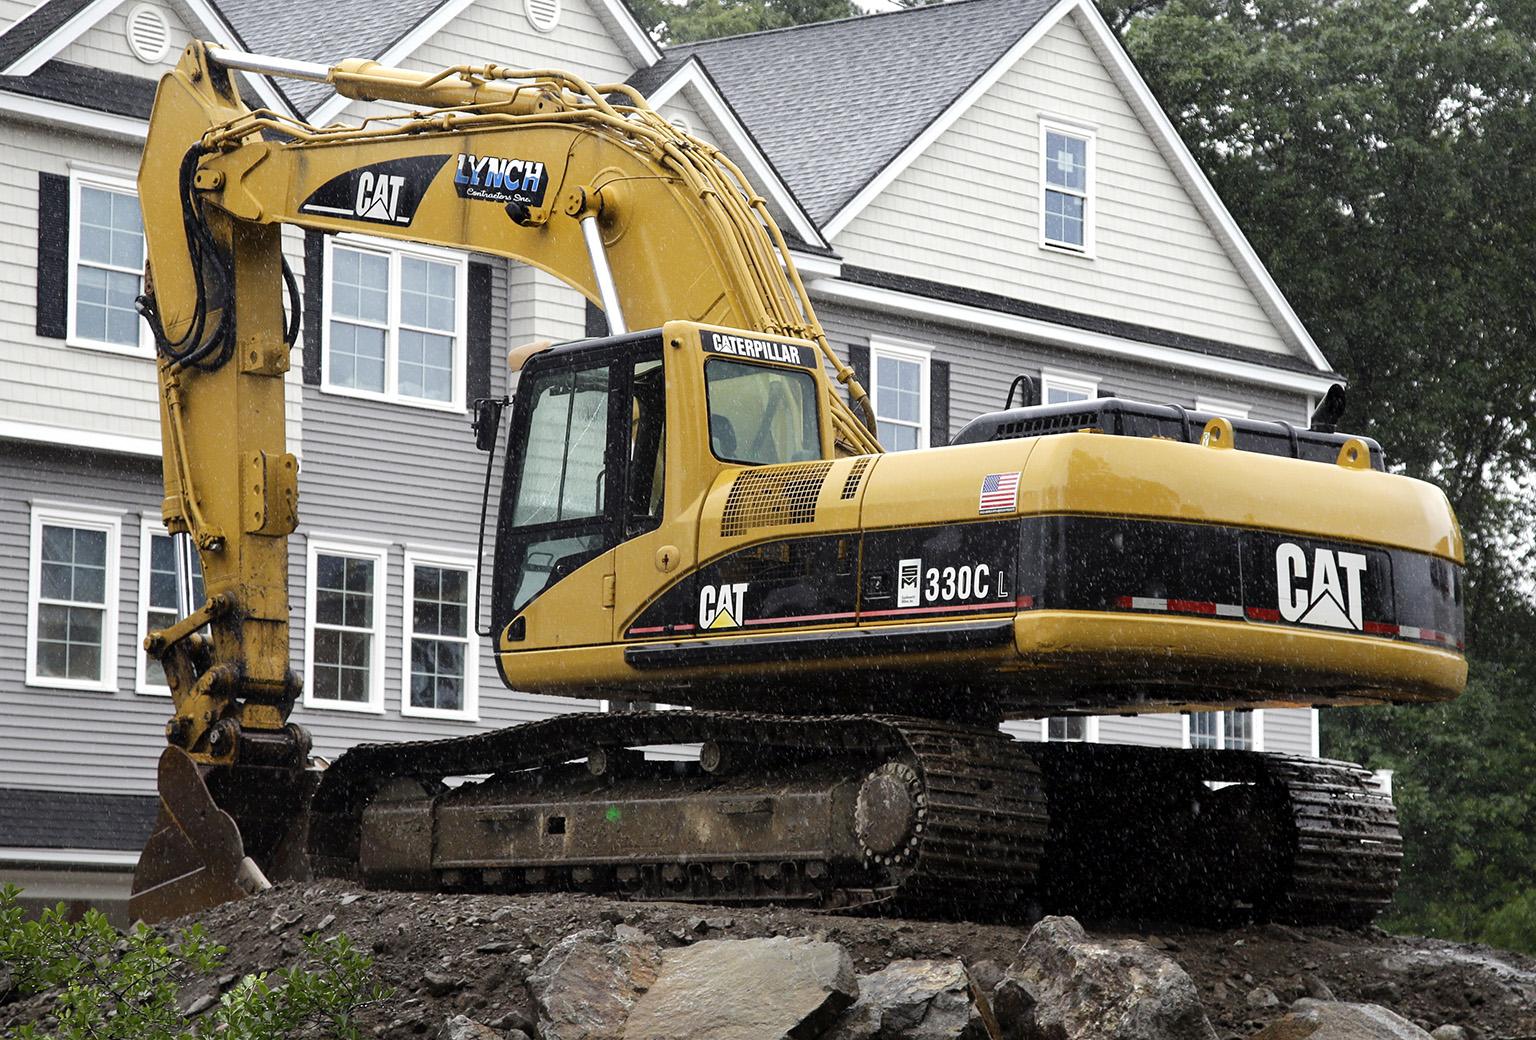 In this July 24, 2017 file photo, a Caterpillar excavator rests at a housing construction site in North Andover, Mass. Caterpillar Inc. reports earnings Tuesday, Oct. 23, 2018. (AP Photo / Elise Amendola, FIle)